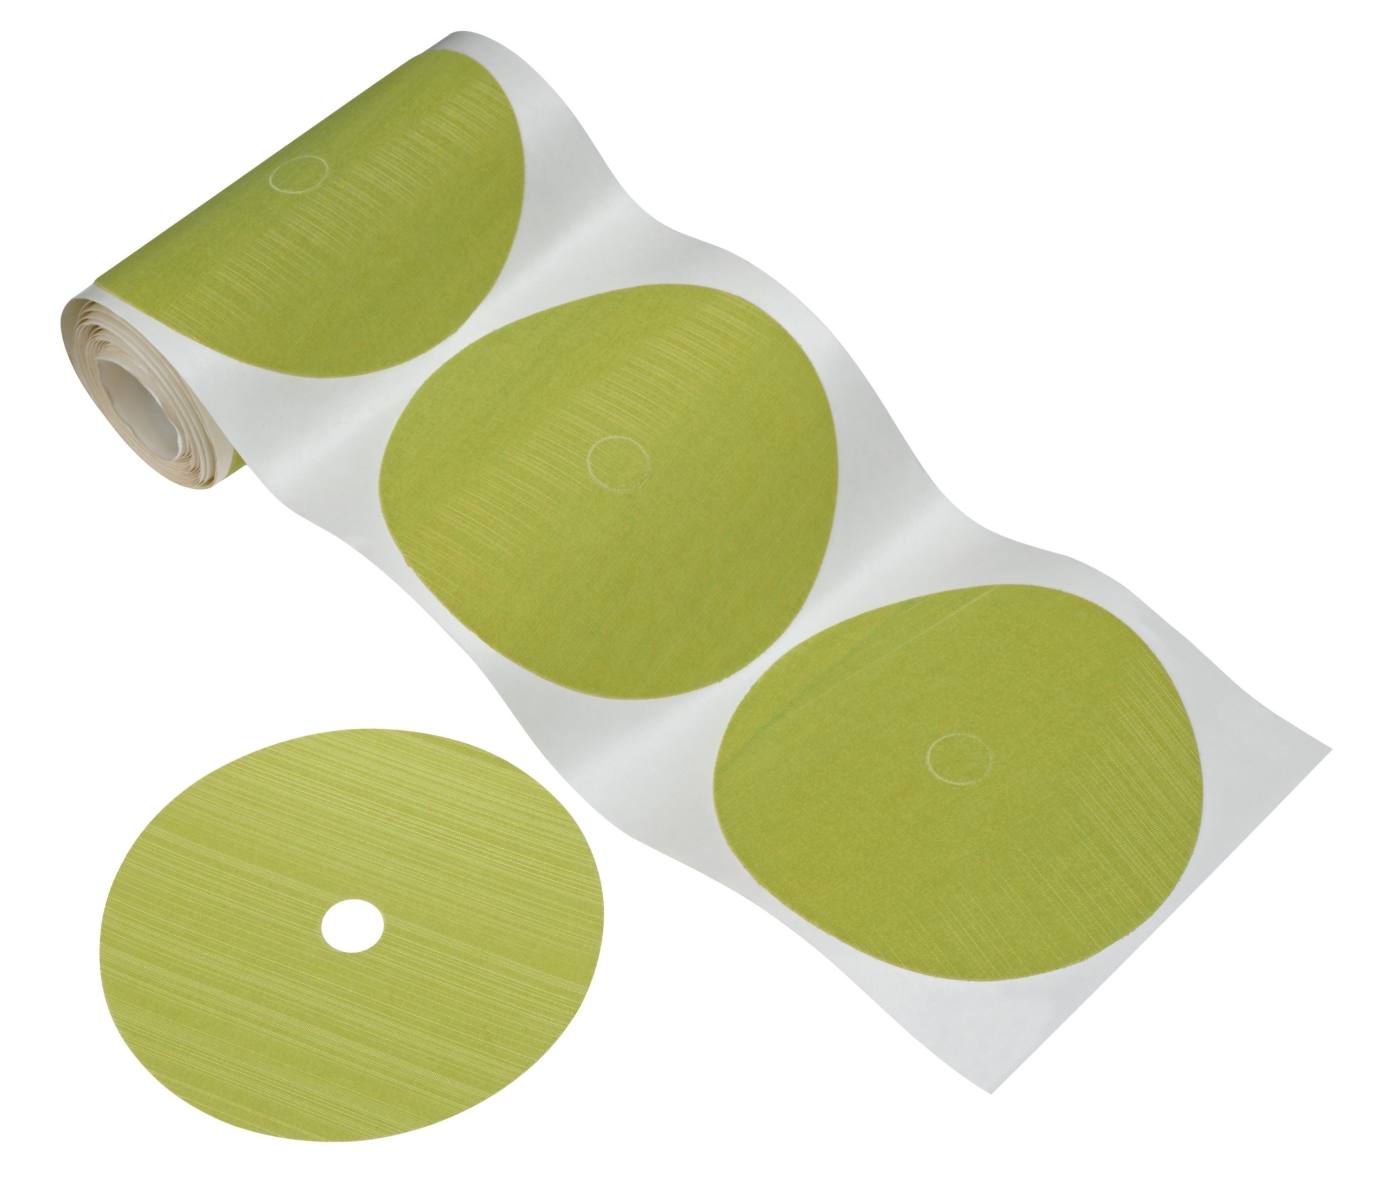 3M Trizact structured film disk 268XA, 127mmx12,7m, green, A035 (roll of 100 disks) #94140